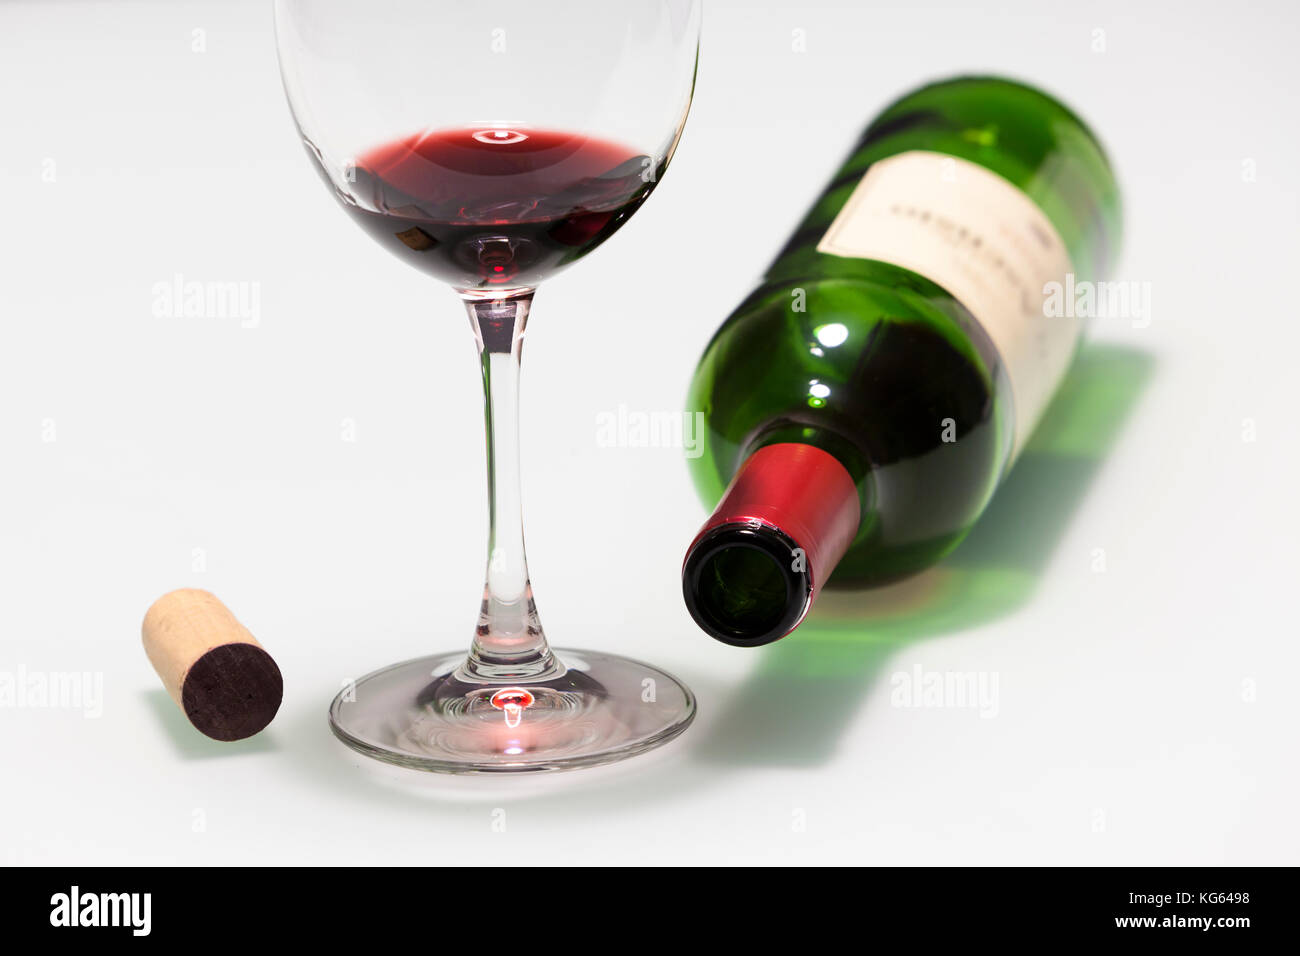 Cup with some red wine, cork and empty bottle Stock Photo